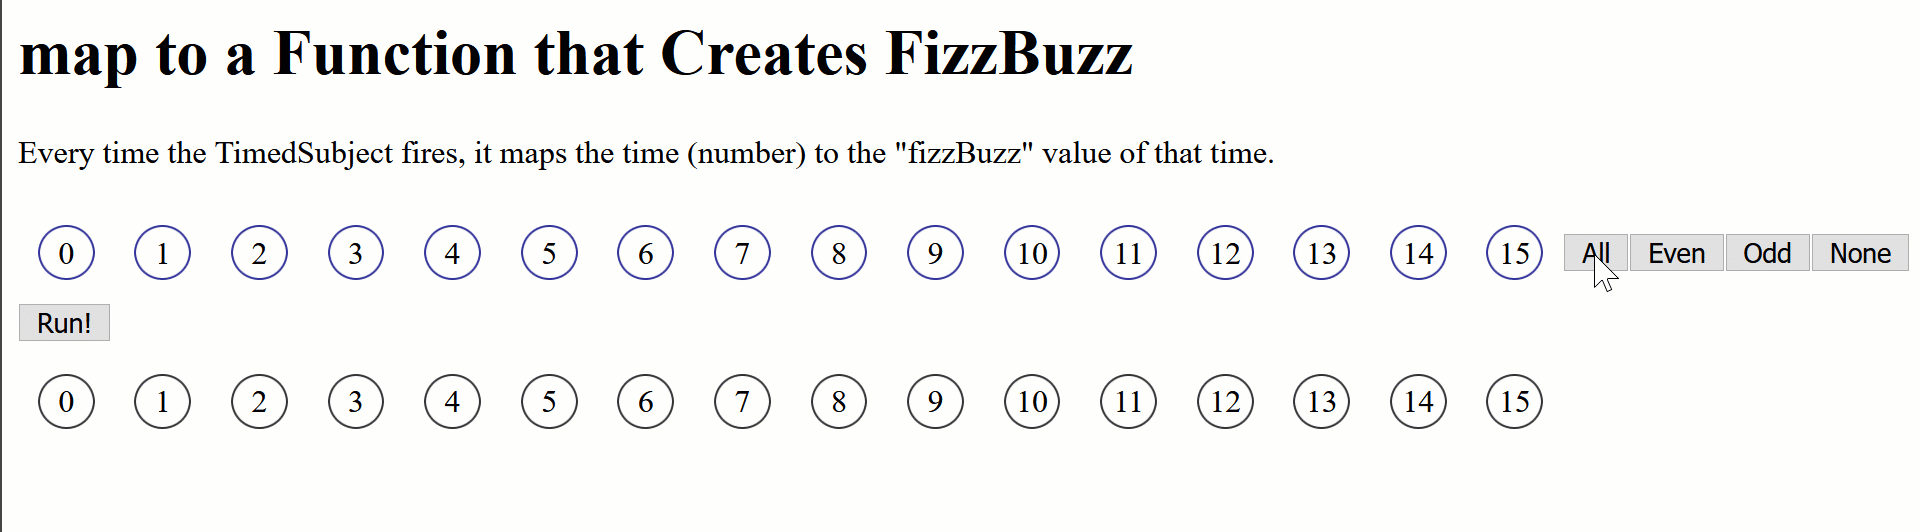 result of fizzBuzz applied to a timed subject